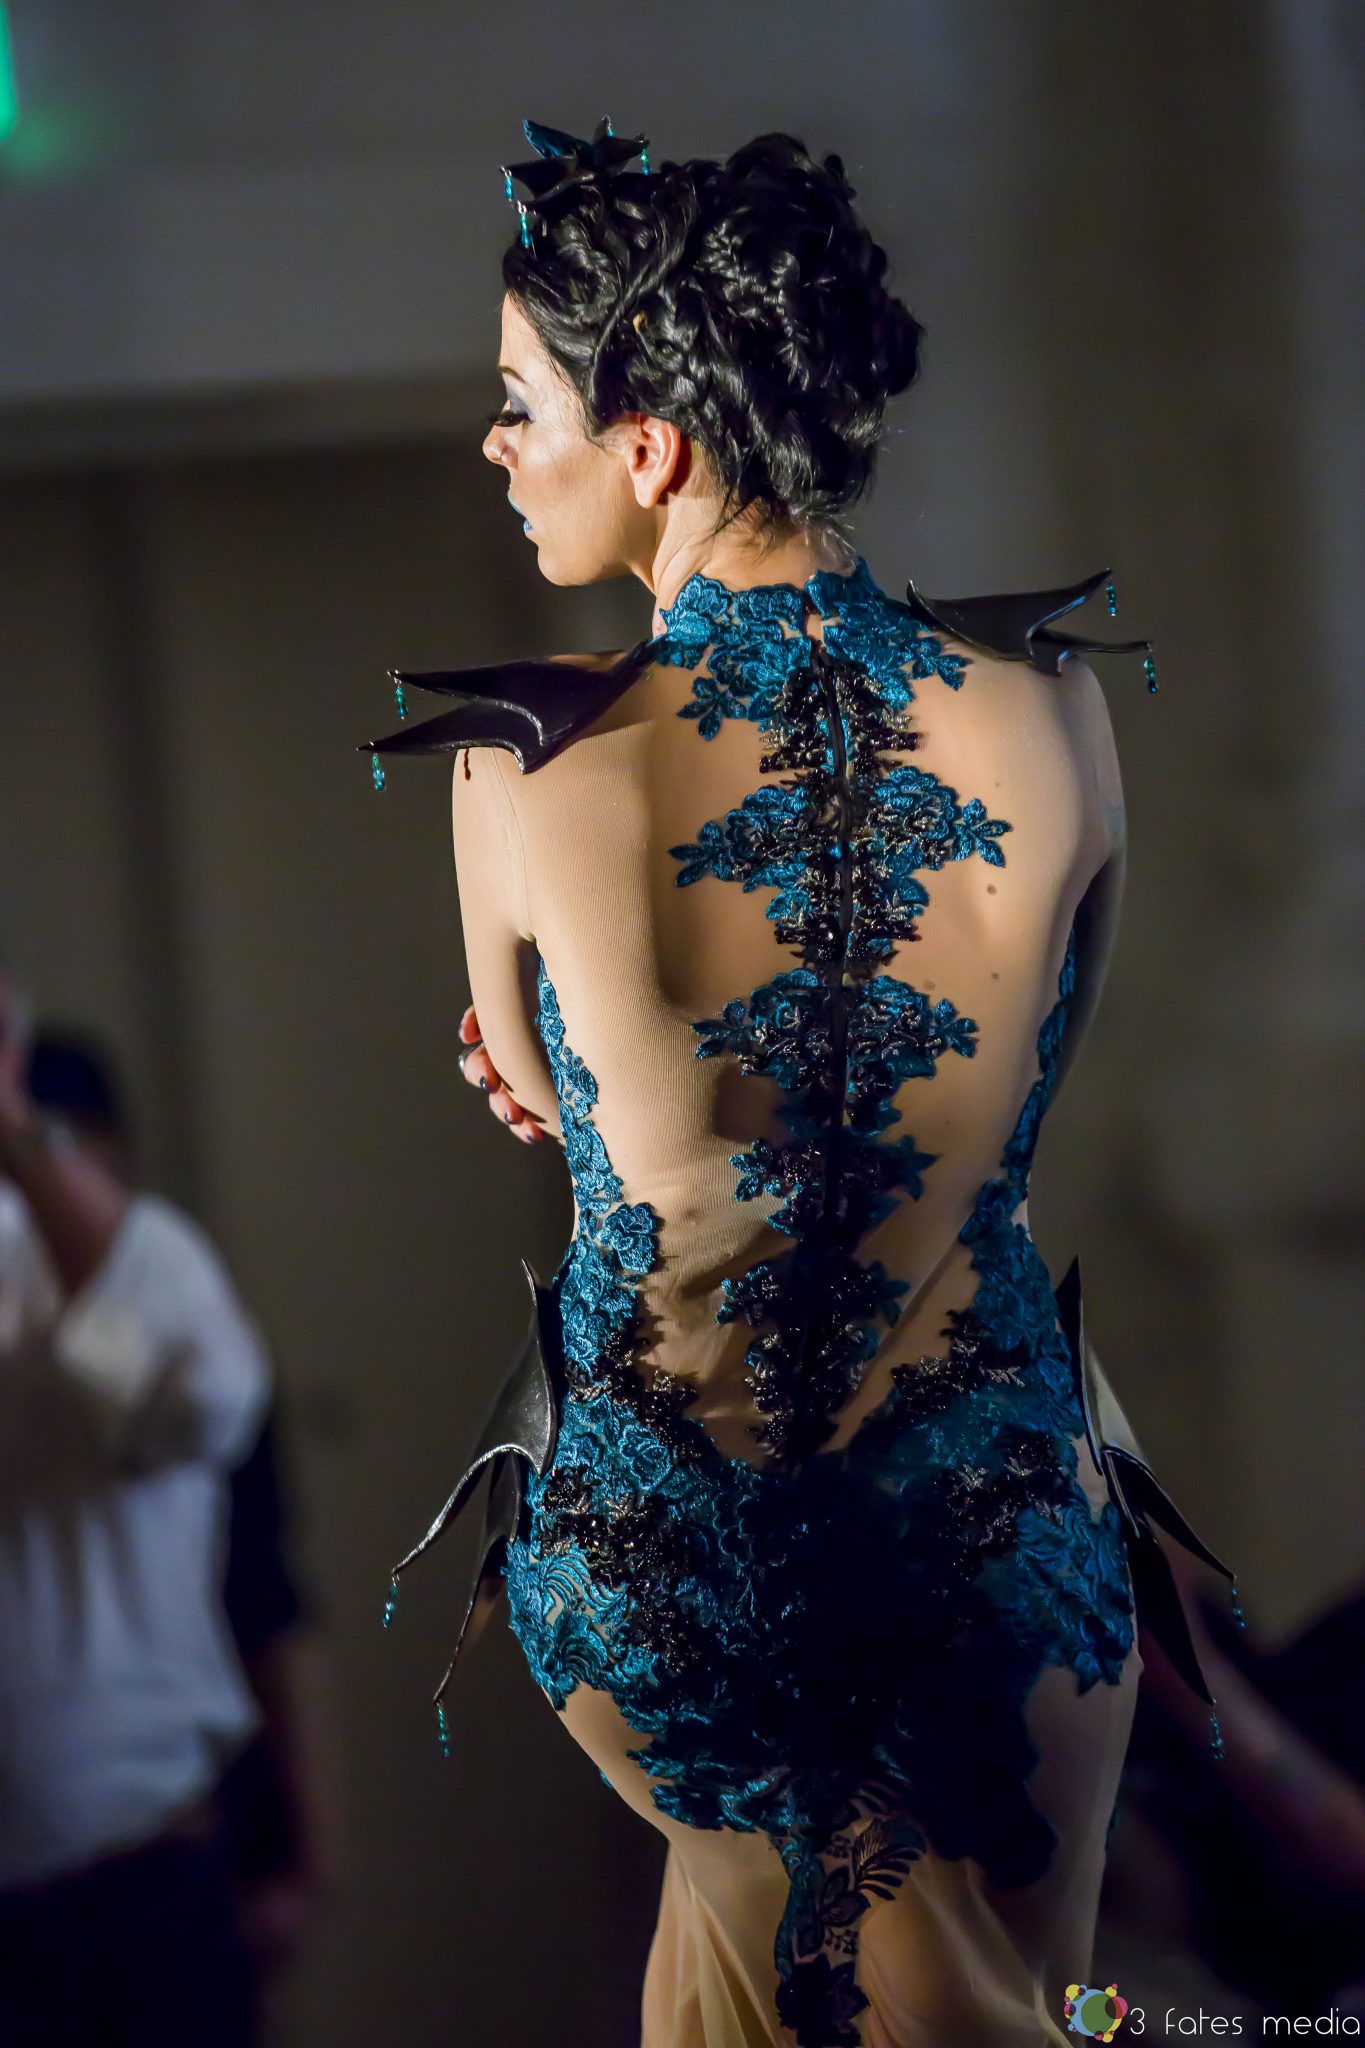 Peacock and black armoured lace gown